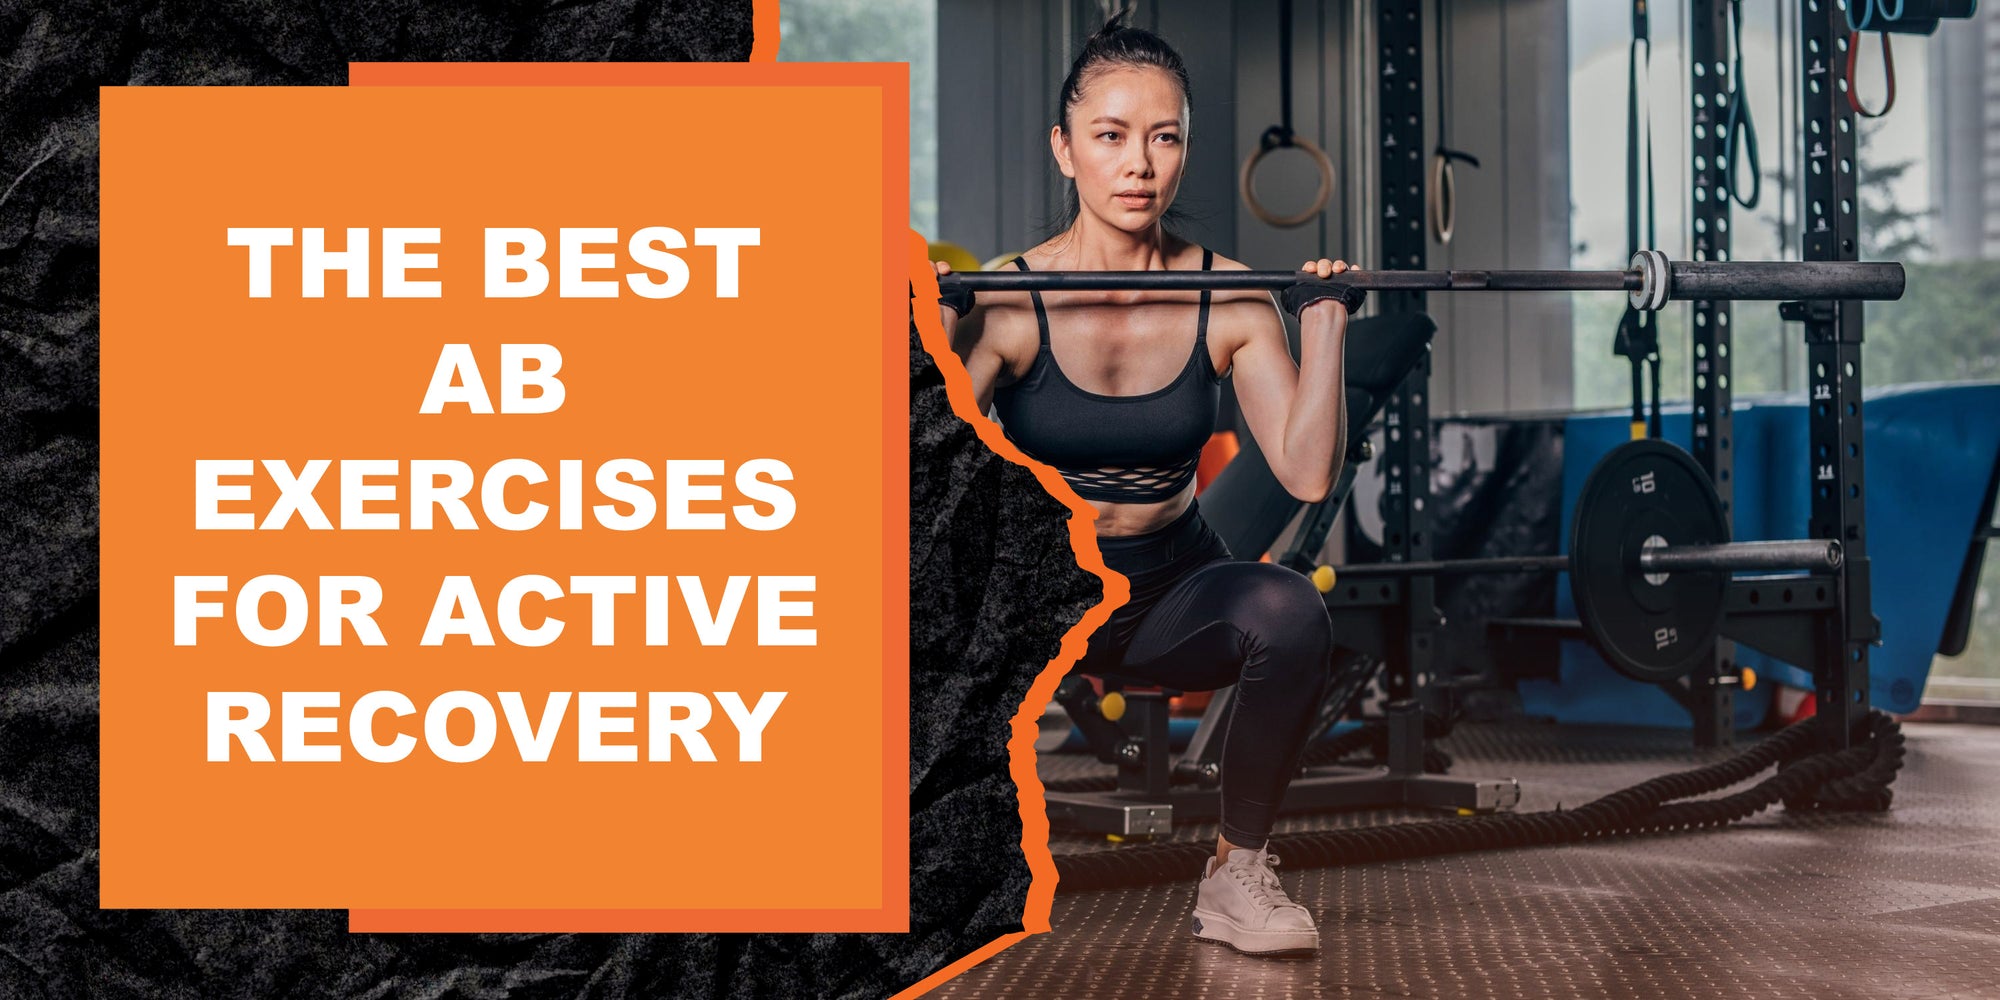 The Best Ab Exercises for Active Recovery